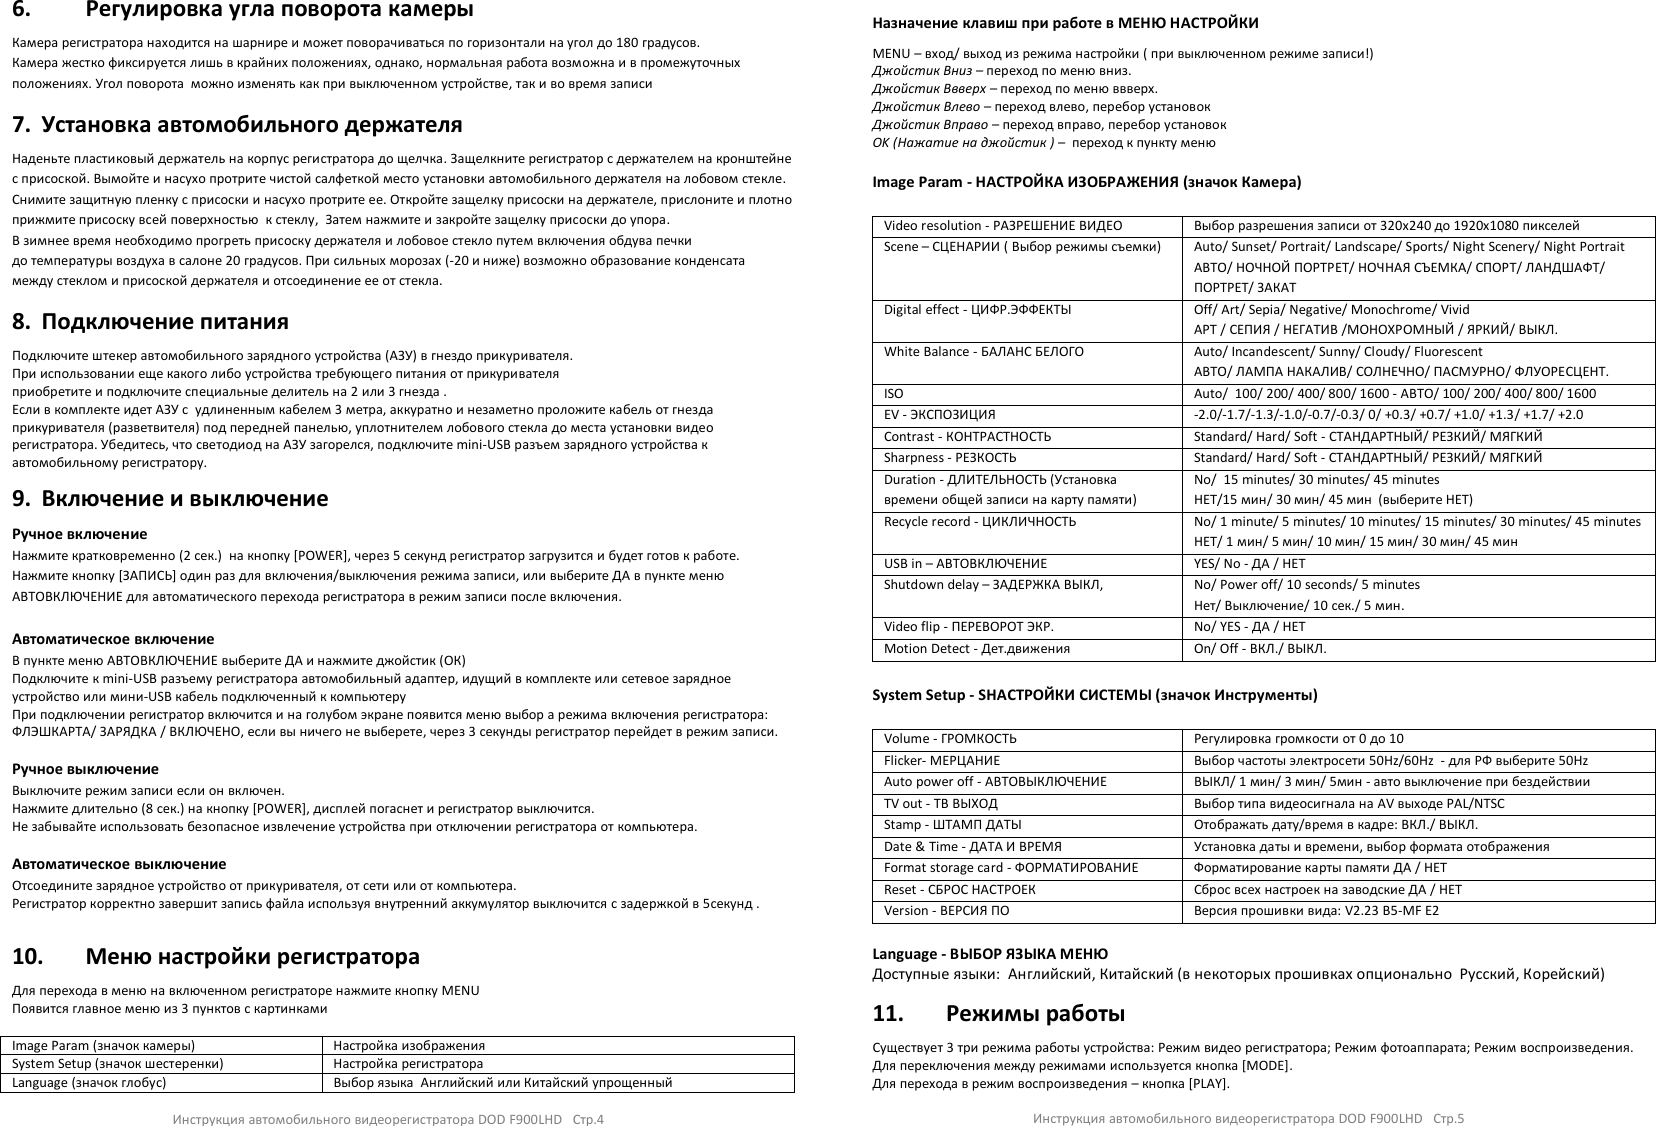 Page 3 of 4 - F900LHD Russian Manual  0 832